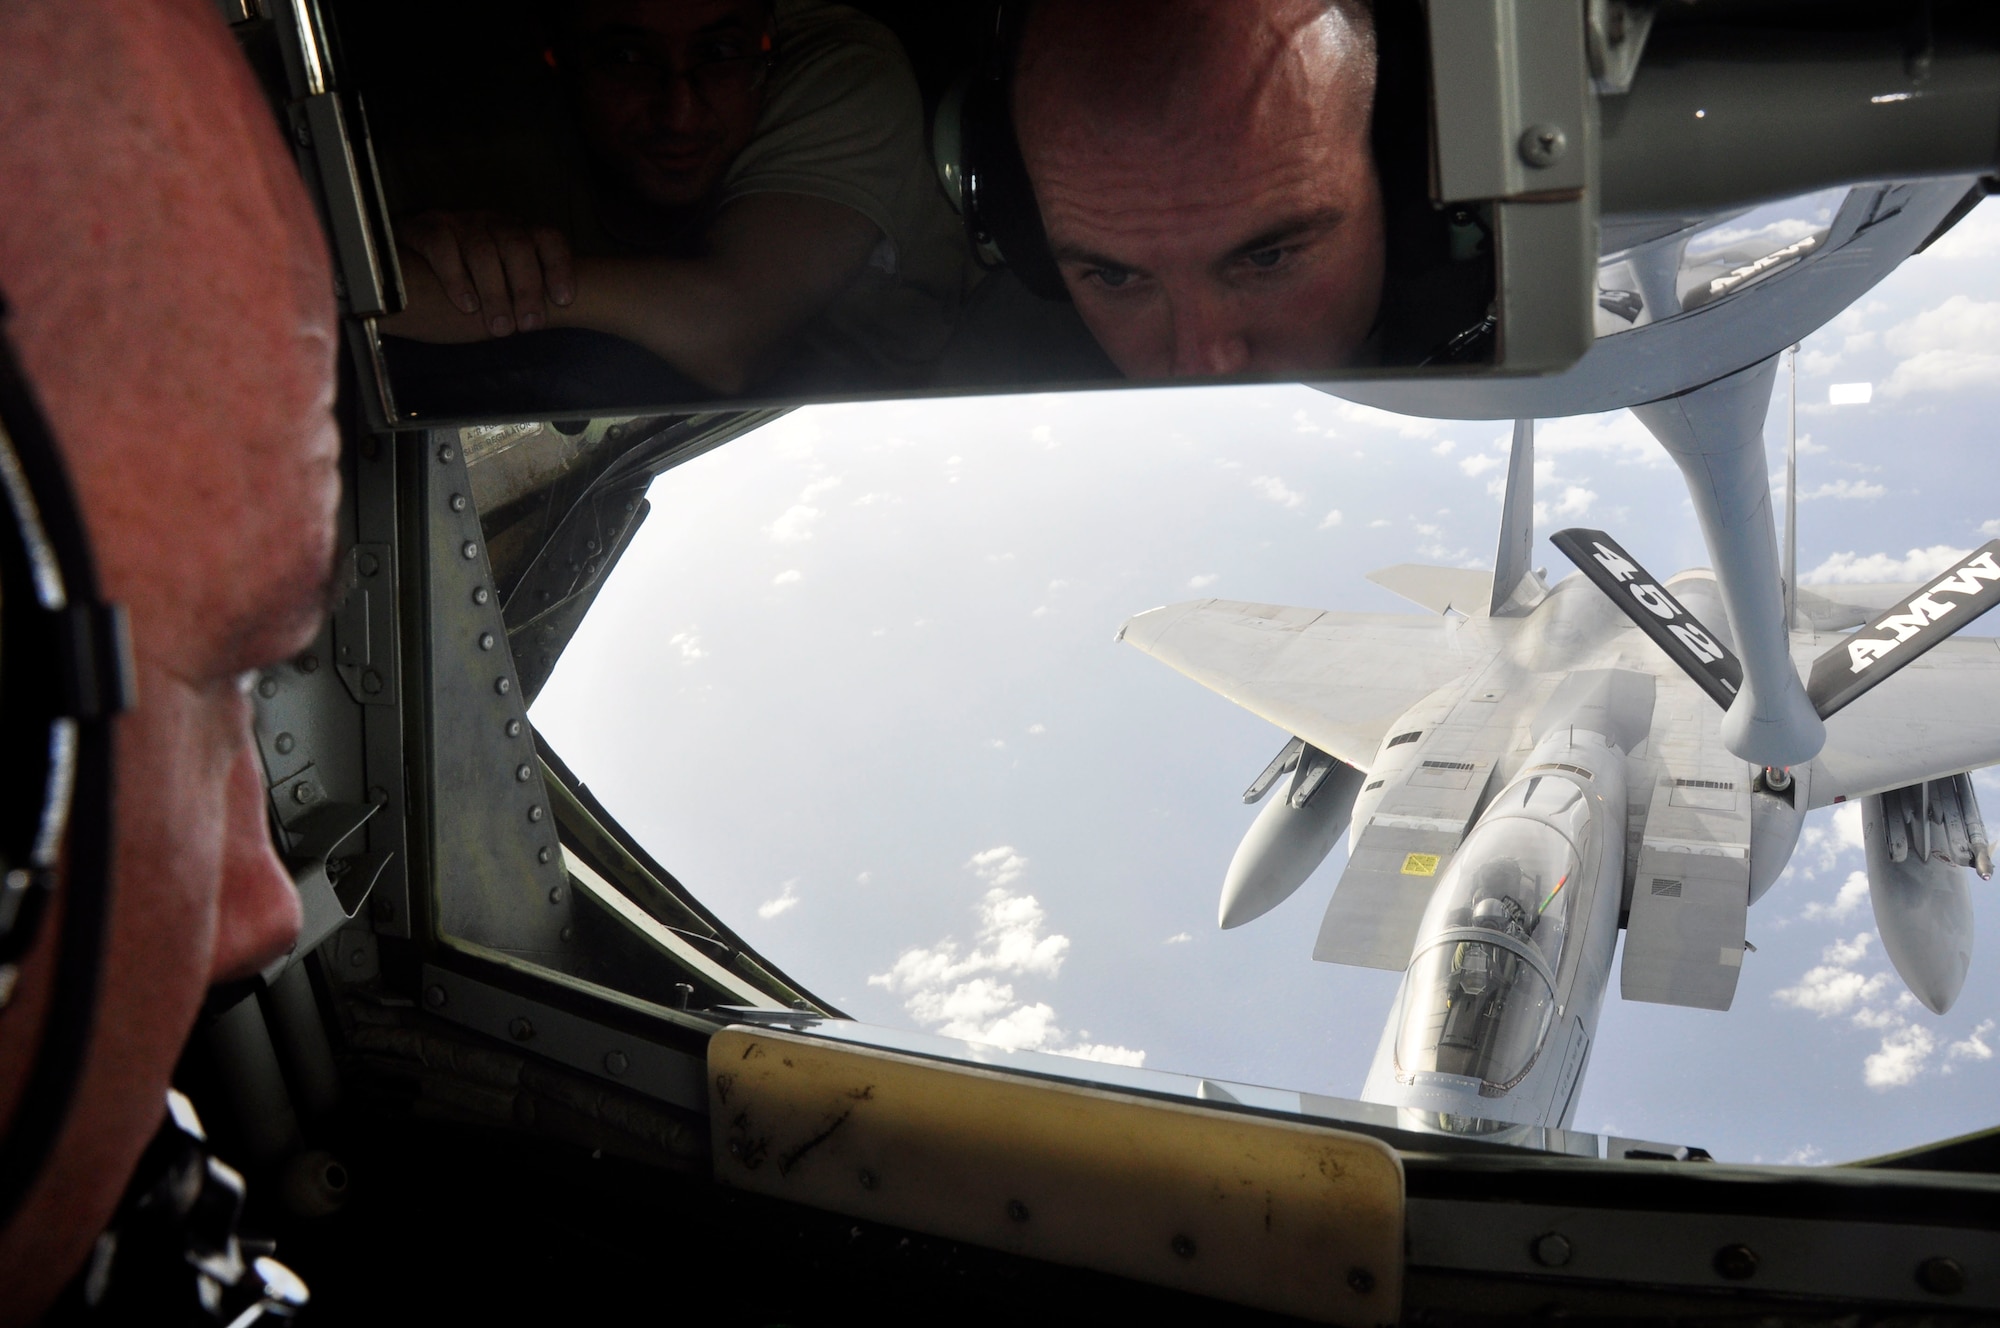 Tech. Sgt. Scot Parry, 48th Aerial Port Squadron, watches as Senior Master Sgt. Ray Lewis, a KC-135 Stratotanker boom operator from McConnell Air Force Base, Kan., refuels a Hawaii Air National Guard F-15 Eagle over the Hawaiian Islands Nov. 7 as a part of the 624th Regional Support Group’s first ever Employer Support Flight at Hickam Air Force Base, Hawaii. The event, held in co-operation with the Hawaii Committee of the Employer Support for the Guard and Reserve, helped employers better understand the time and sacrifice their employees invest in their role as Air Force Reservists. The KC-135 used for Saturday's Employer Support Flight is assigned to the 452nd Air Mobility Wing at March Air Reserve Base, Calif. (Air Force photo/Master Sgt. Daniel Nathaniel)
